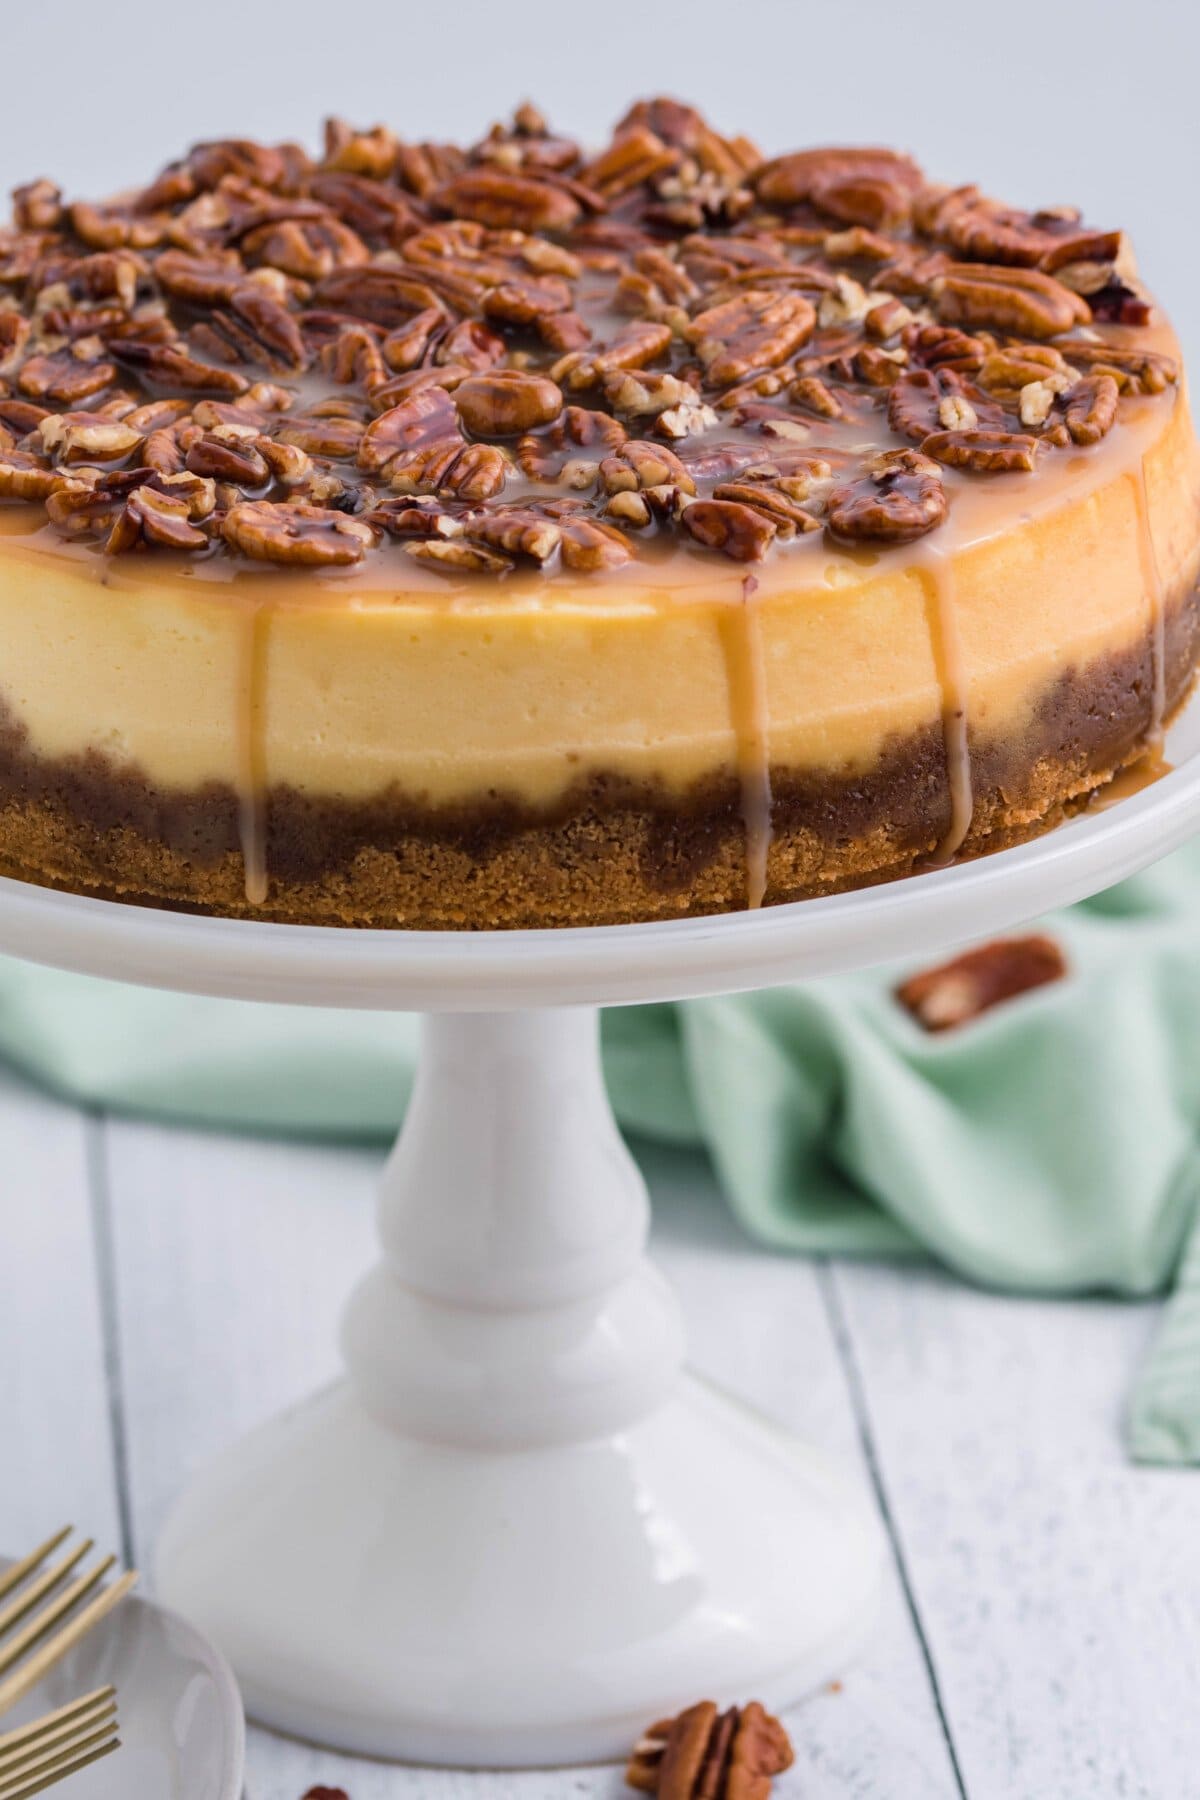 A close up of the pecan cheesecake.